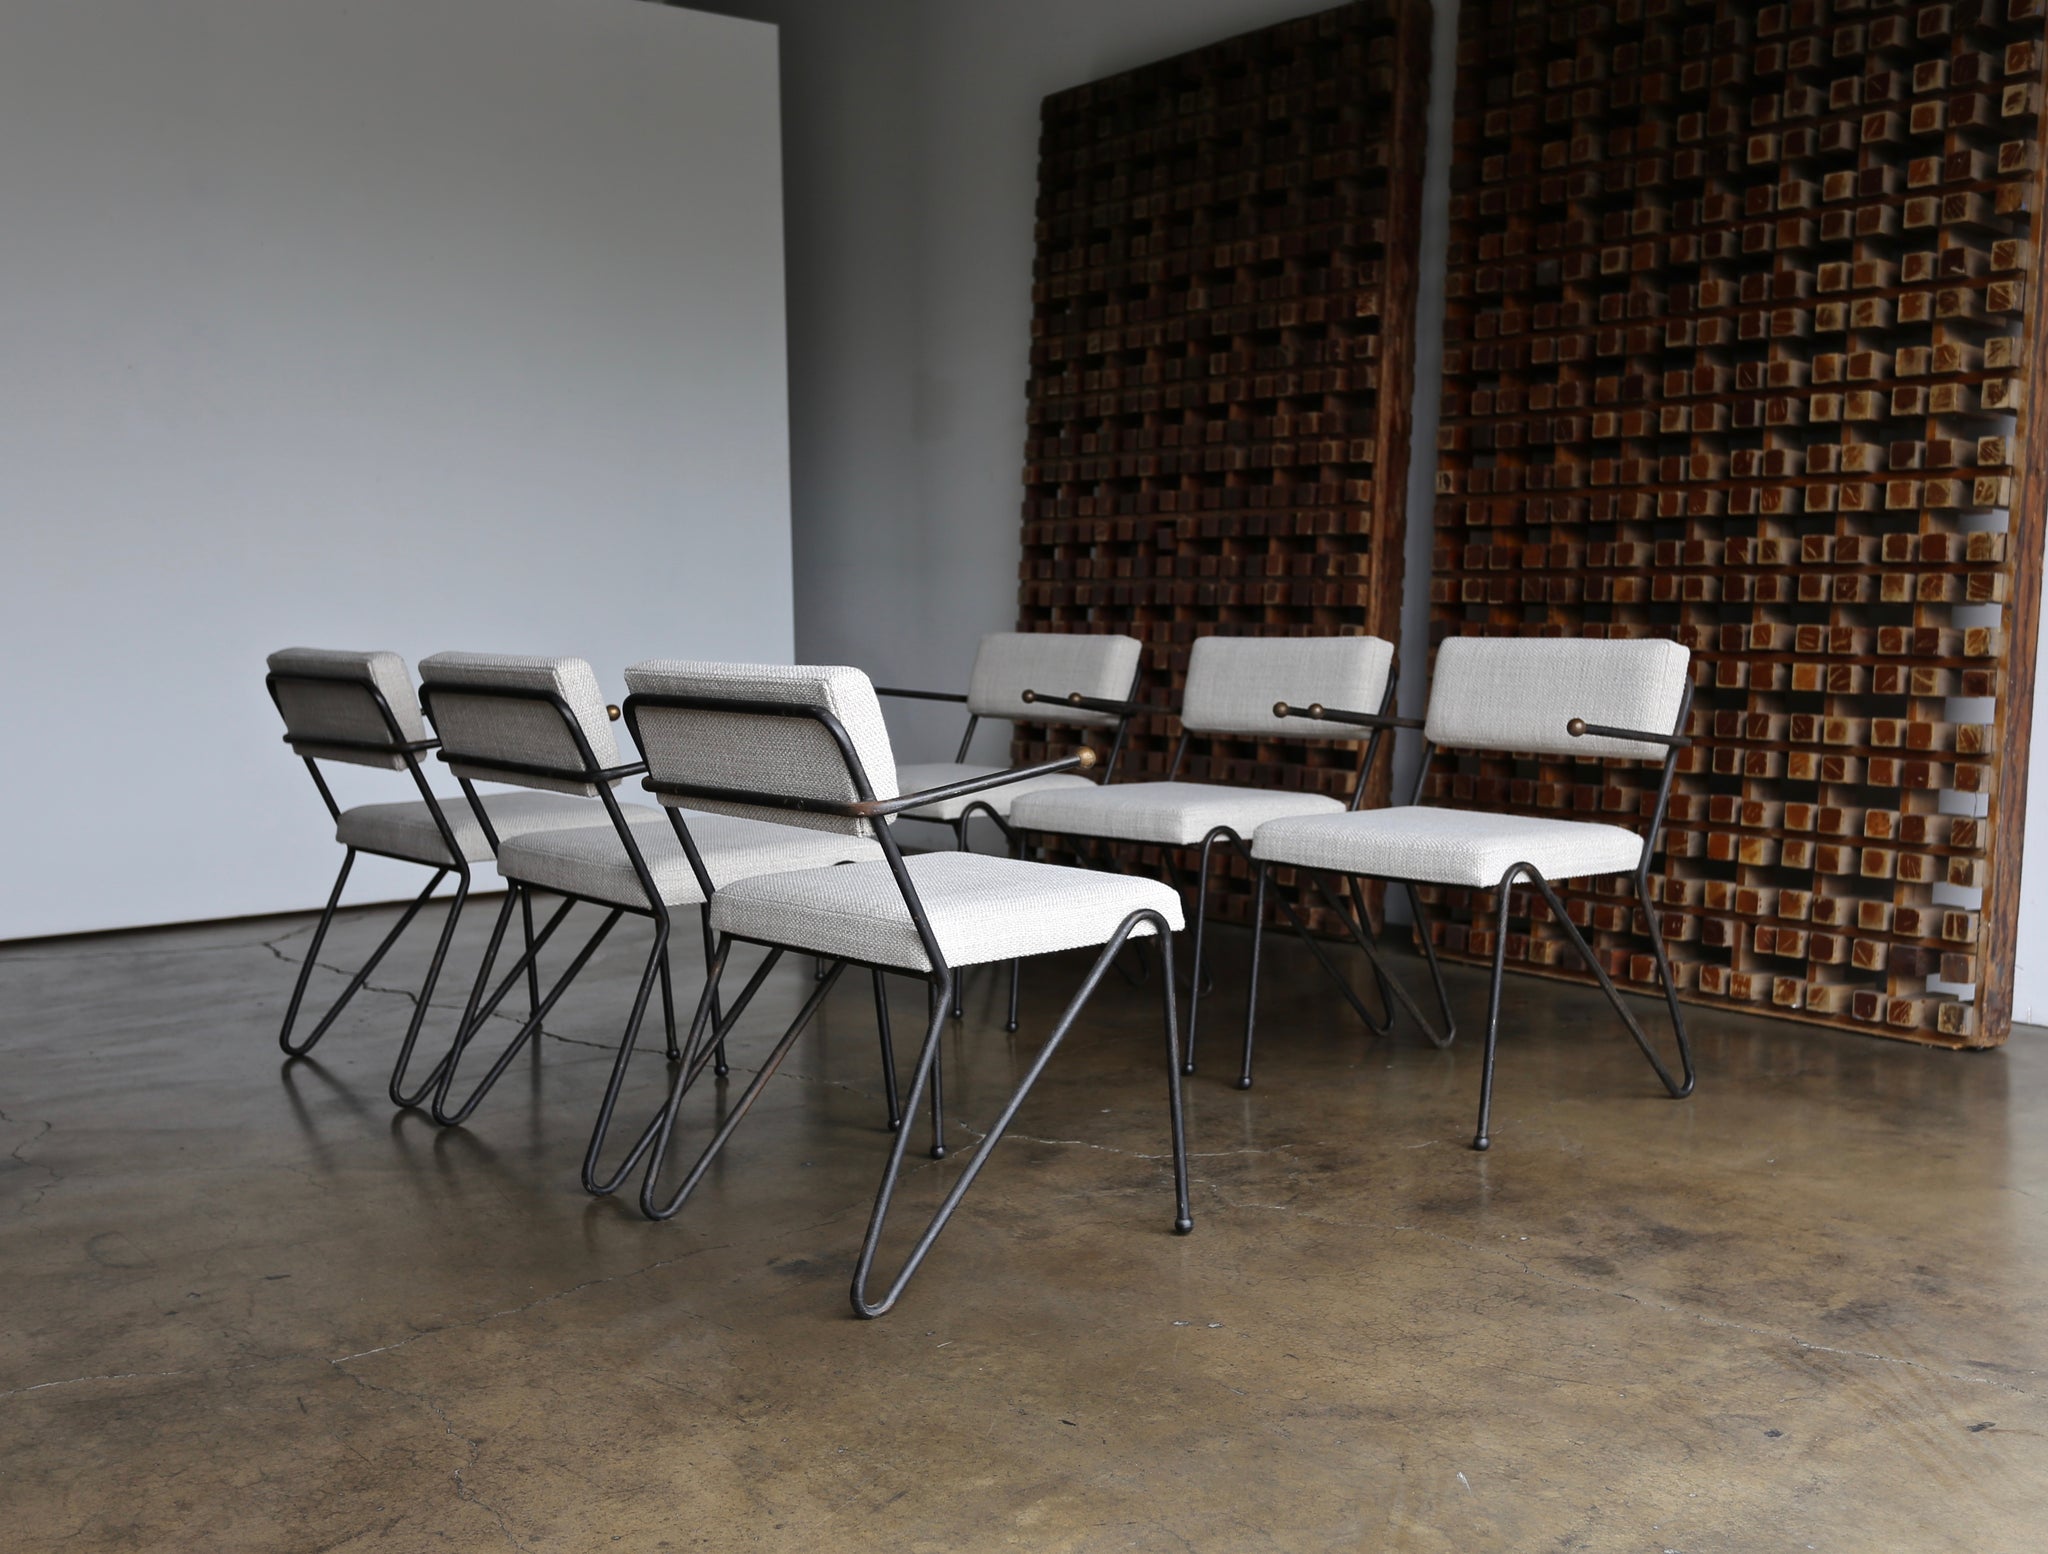 = SOLD = George Kasparian Dining Chairs, circa 1950